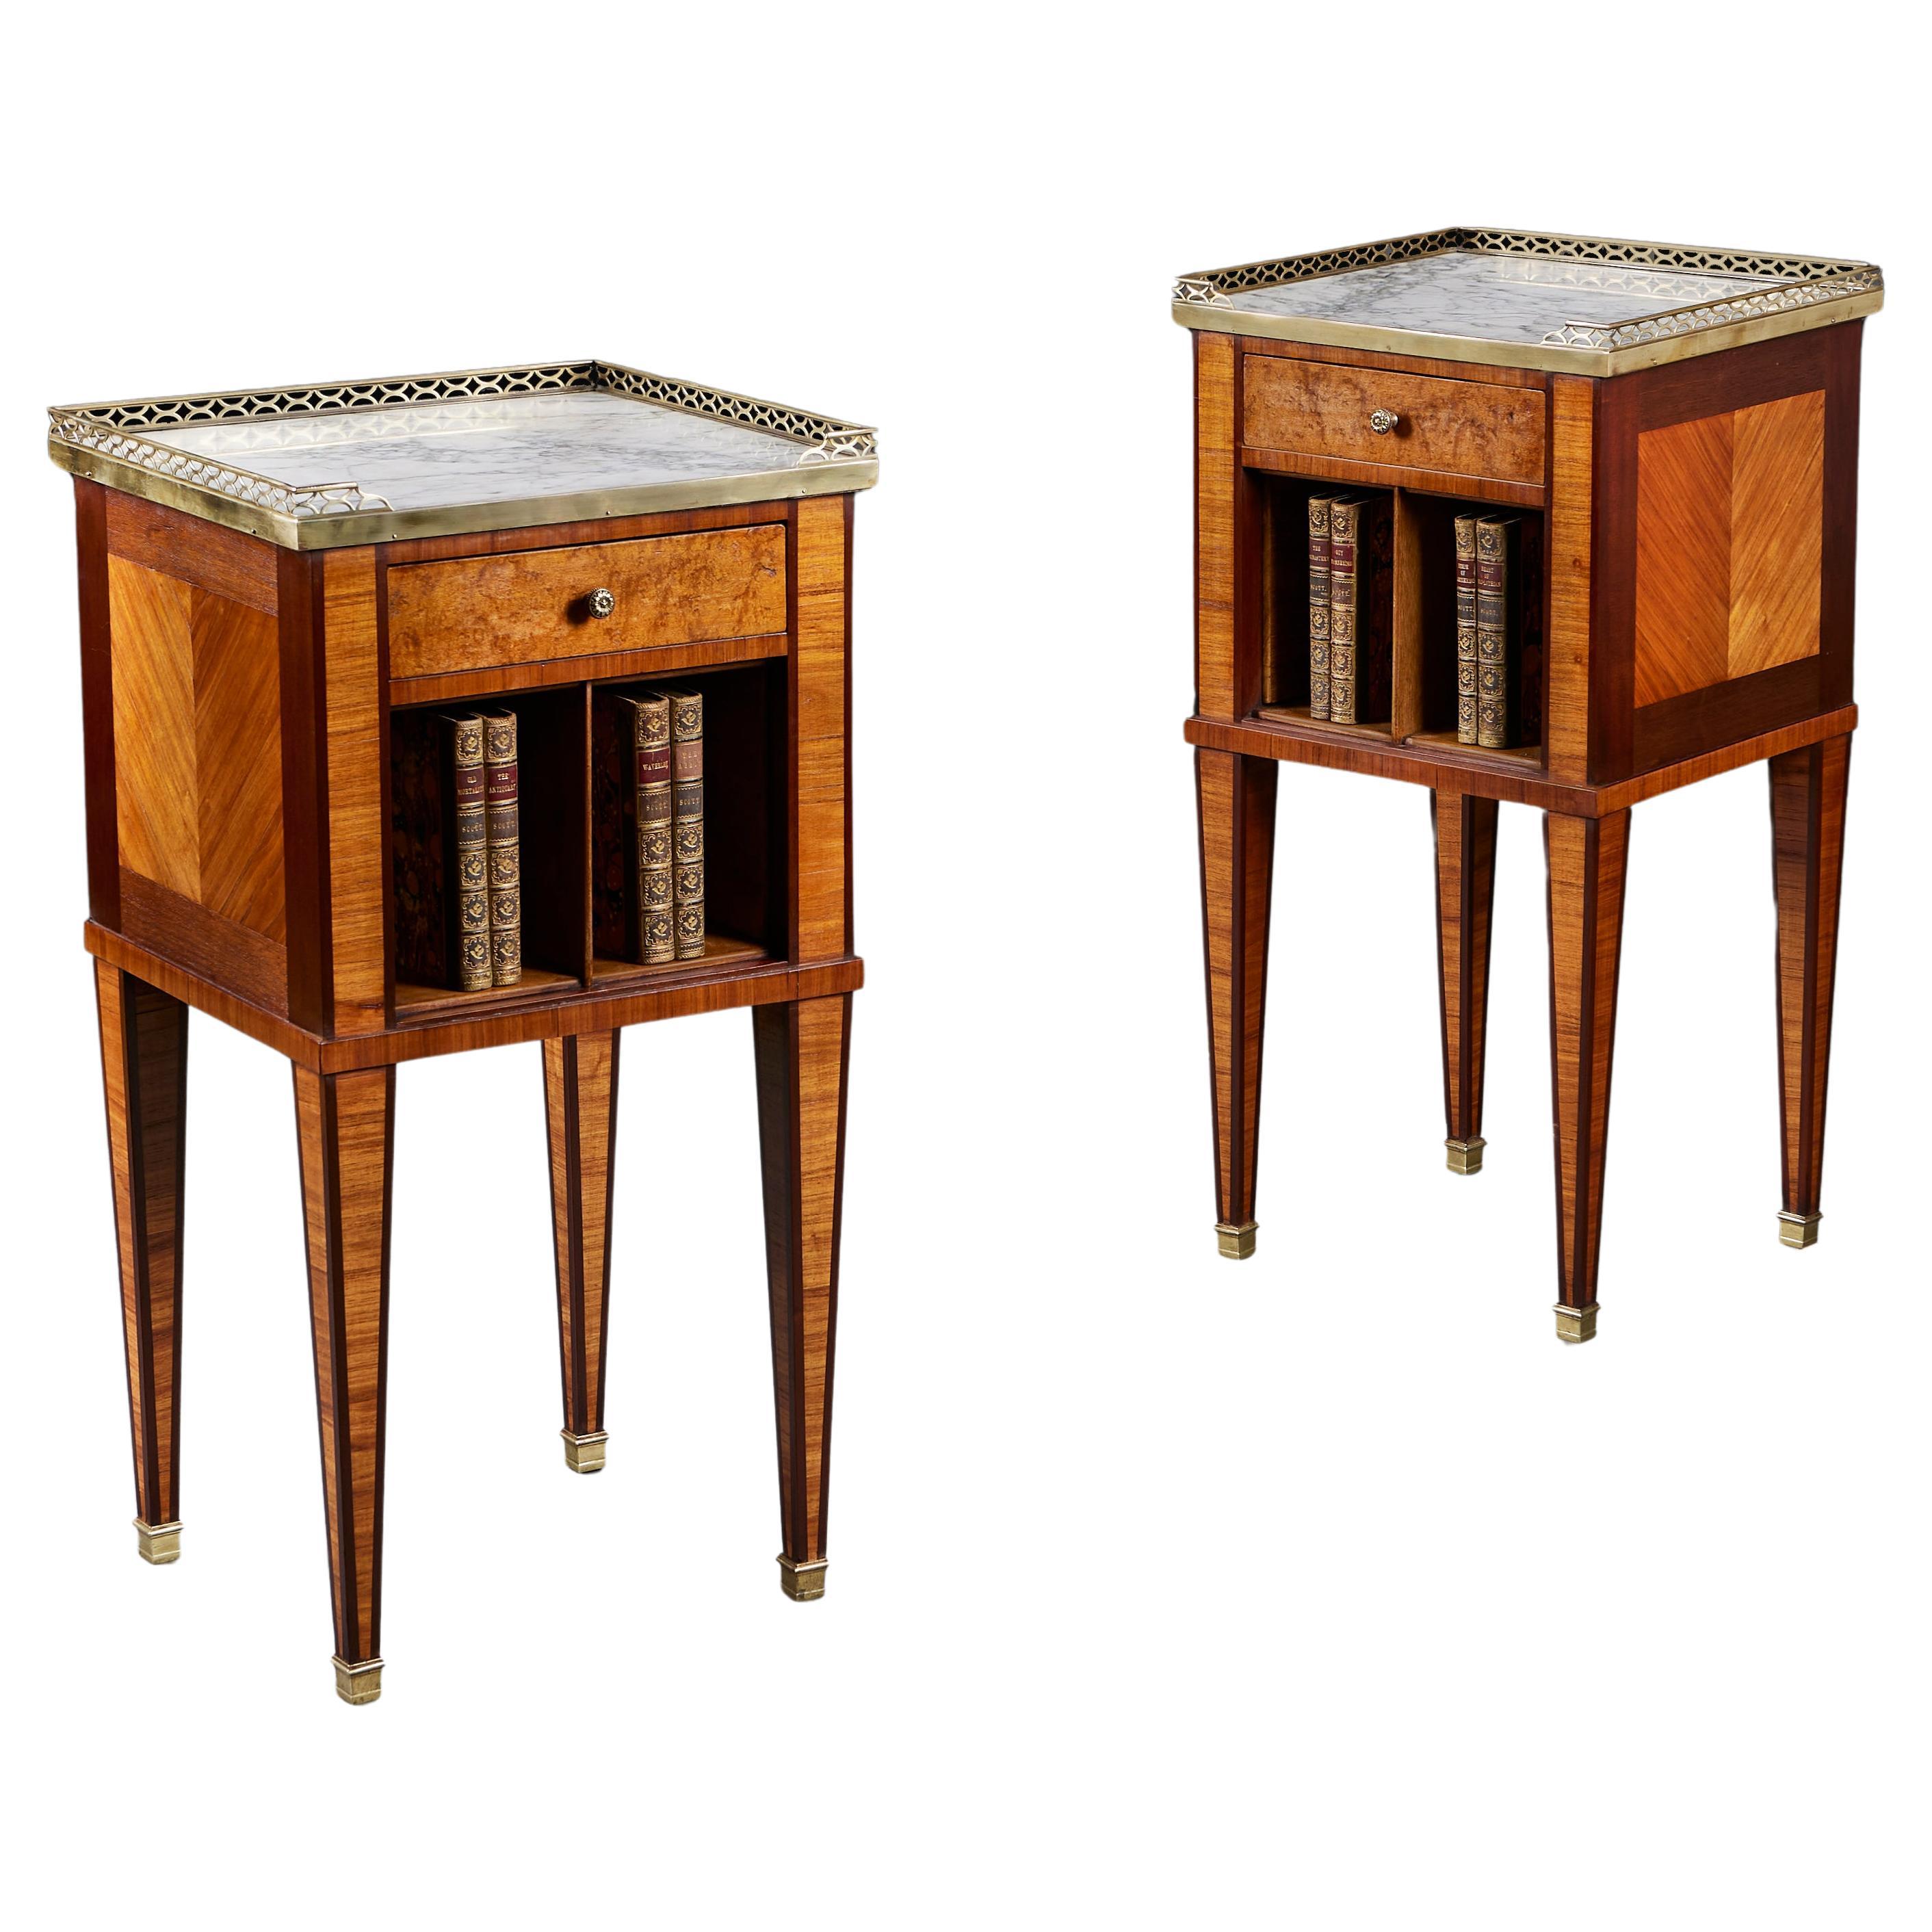 A Pair Of Mid 19th Century Bedside Cabinets For Sale